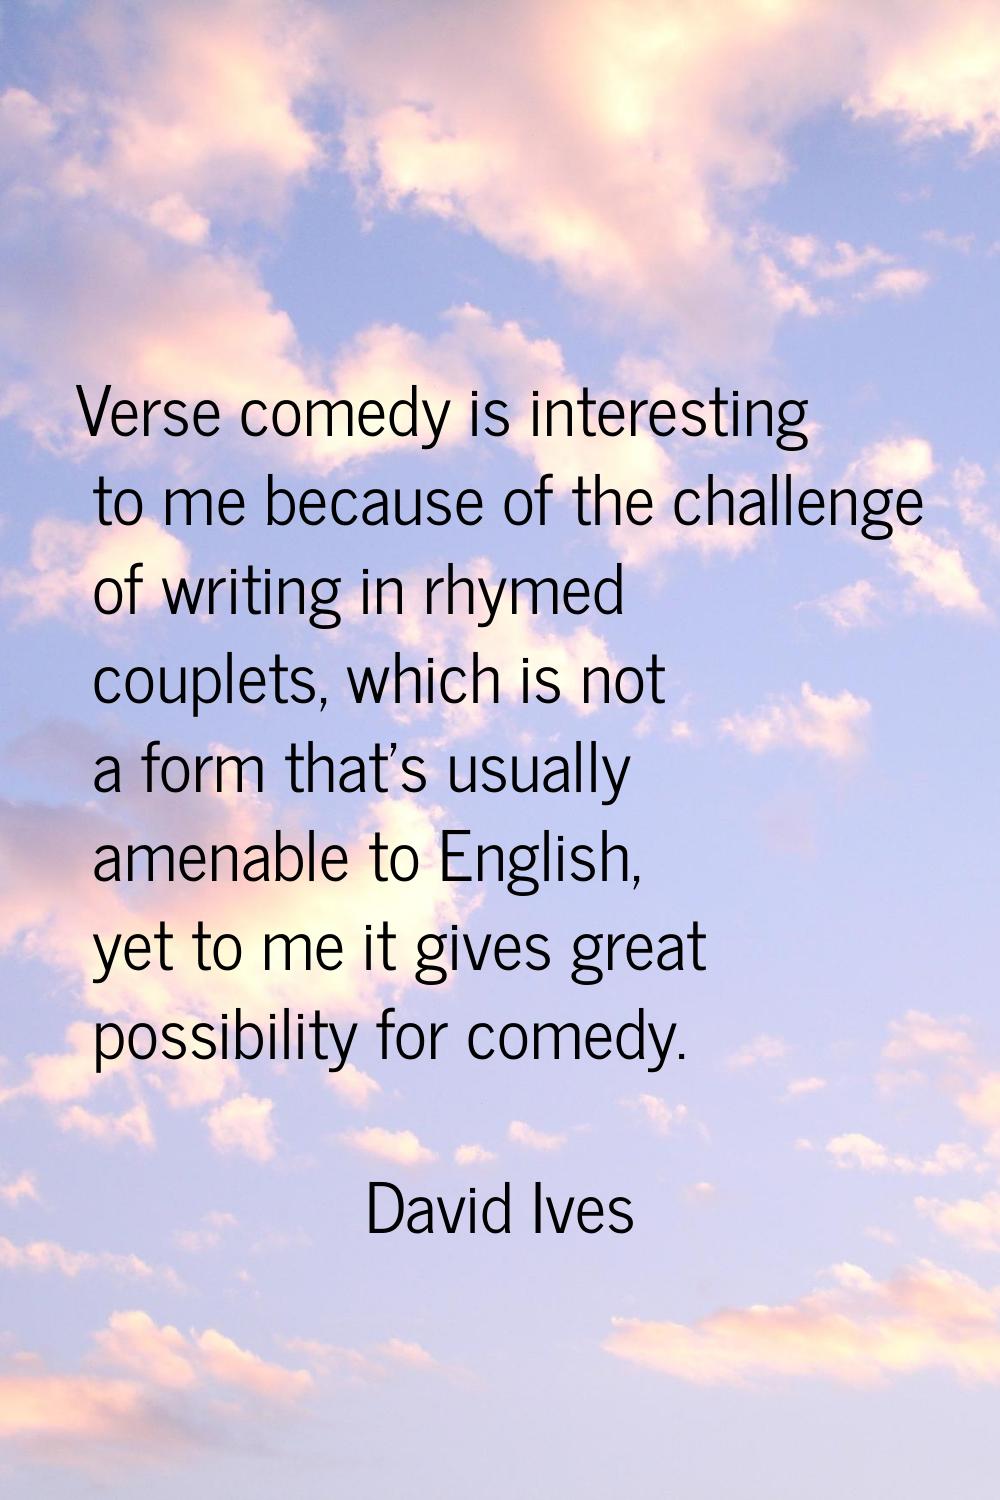 Verse comedy is interesting to me because of the challenge of writing in rhymed couplets, which is 